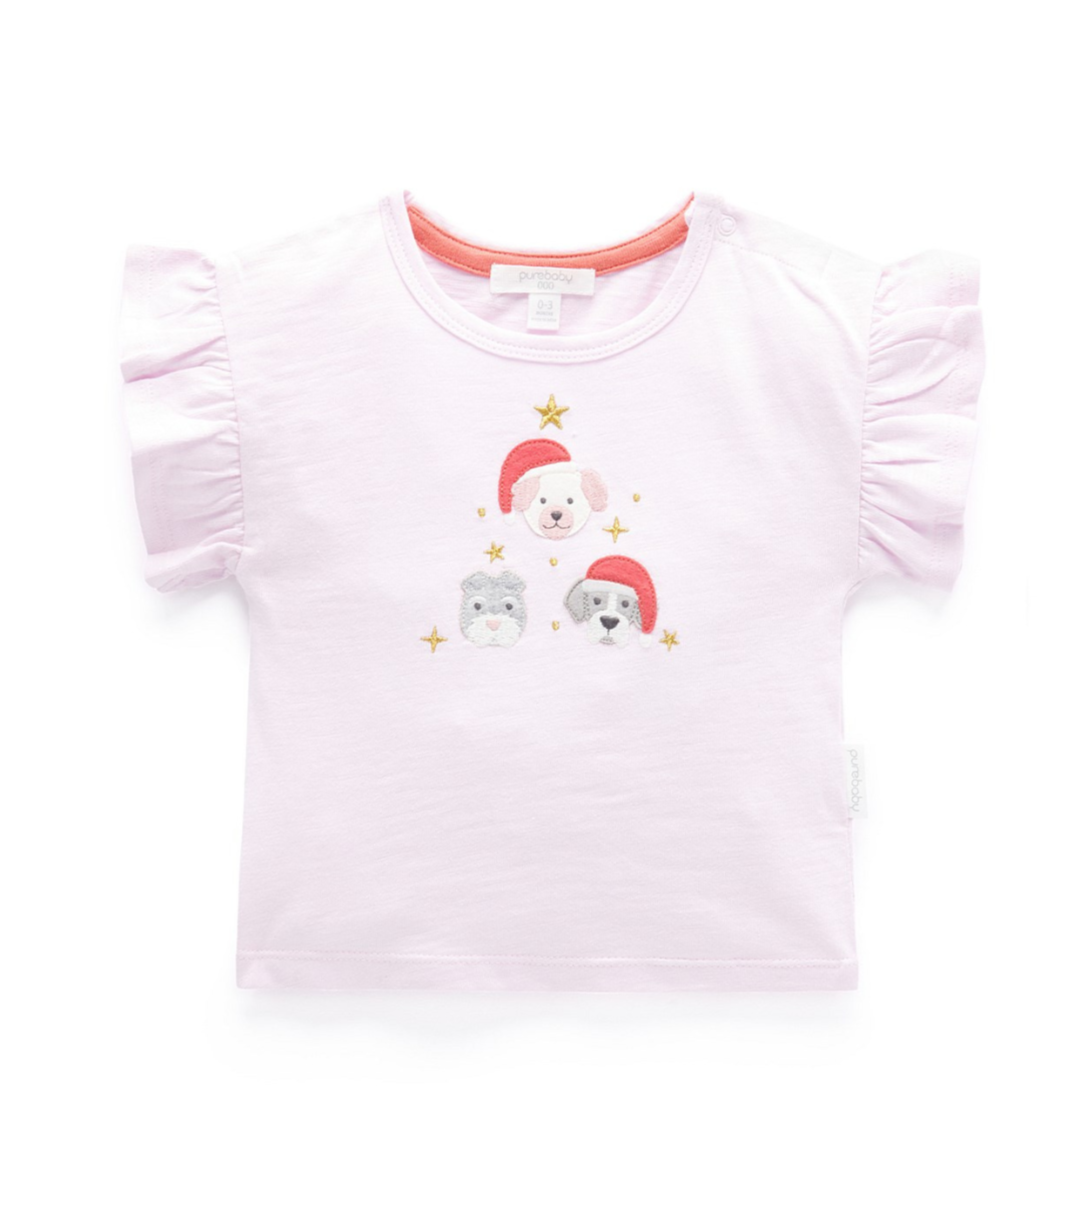 Purebaby Christmas Tree T Shirt - Mother of Pearl